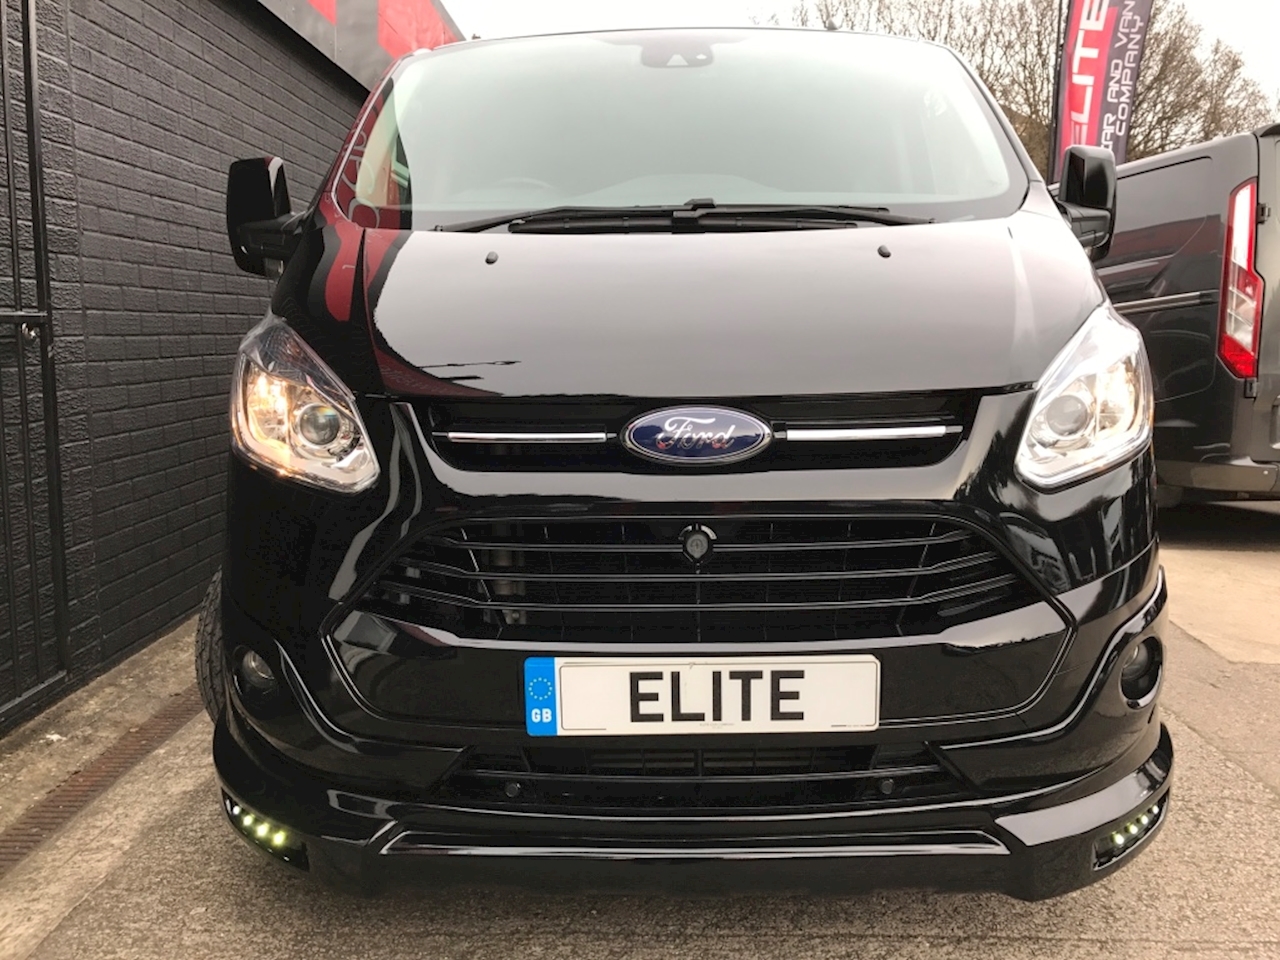 2016 65 Ford Transit Custom Double Cab in Van 290 Limited  [Elite Edition] [125] [Tailgate]